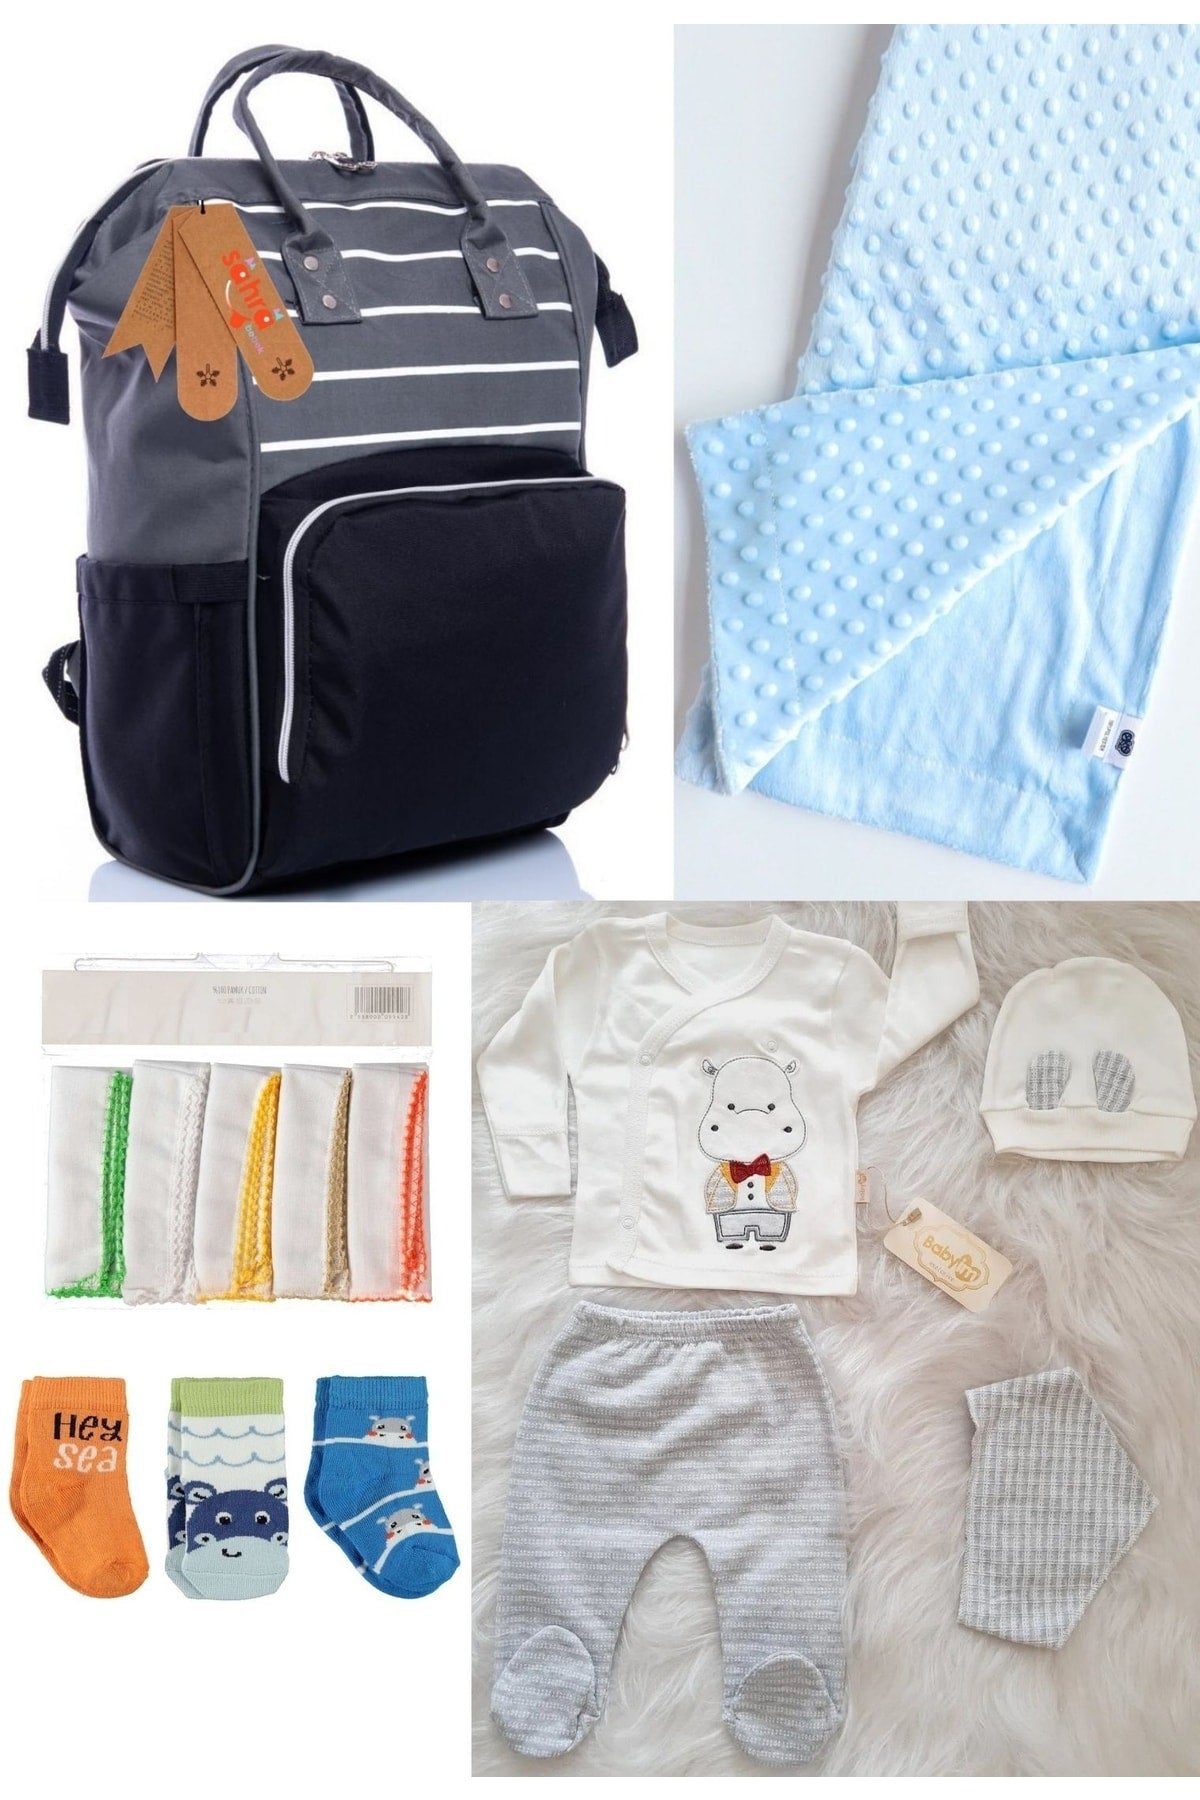 5 Piece Maternity Set (Baby Care Backpack, Hospital Exit, Chickpea Blanket, 10 Wipes and 3 Socks)